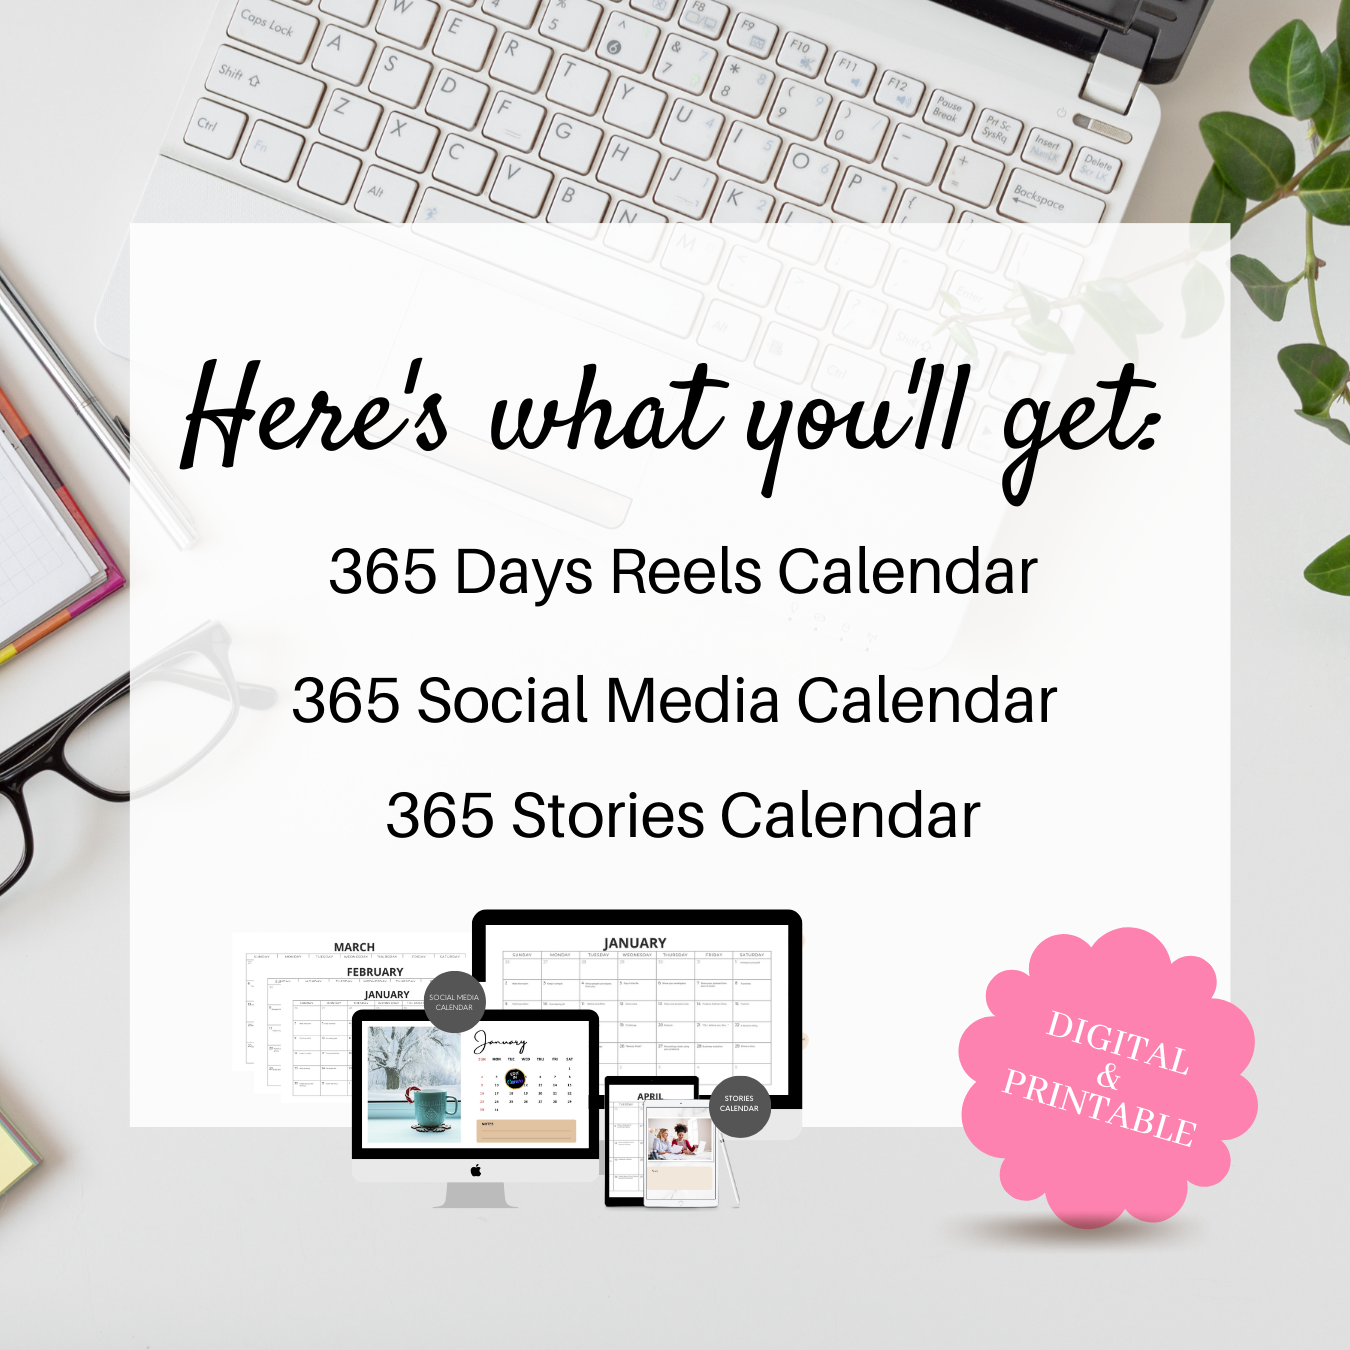 WITH EXAMPLES - 365 Days Reels + Social Media + Stories Calendar